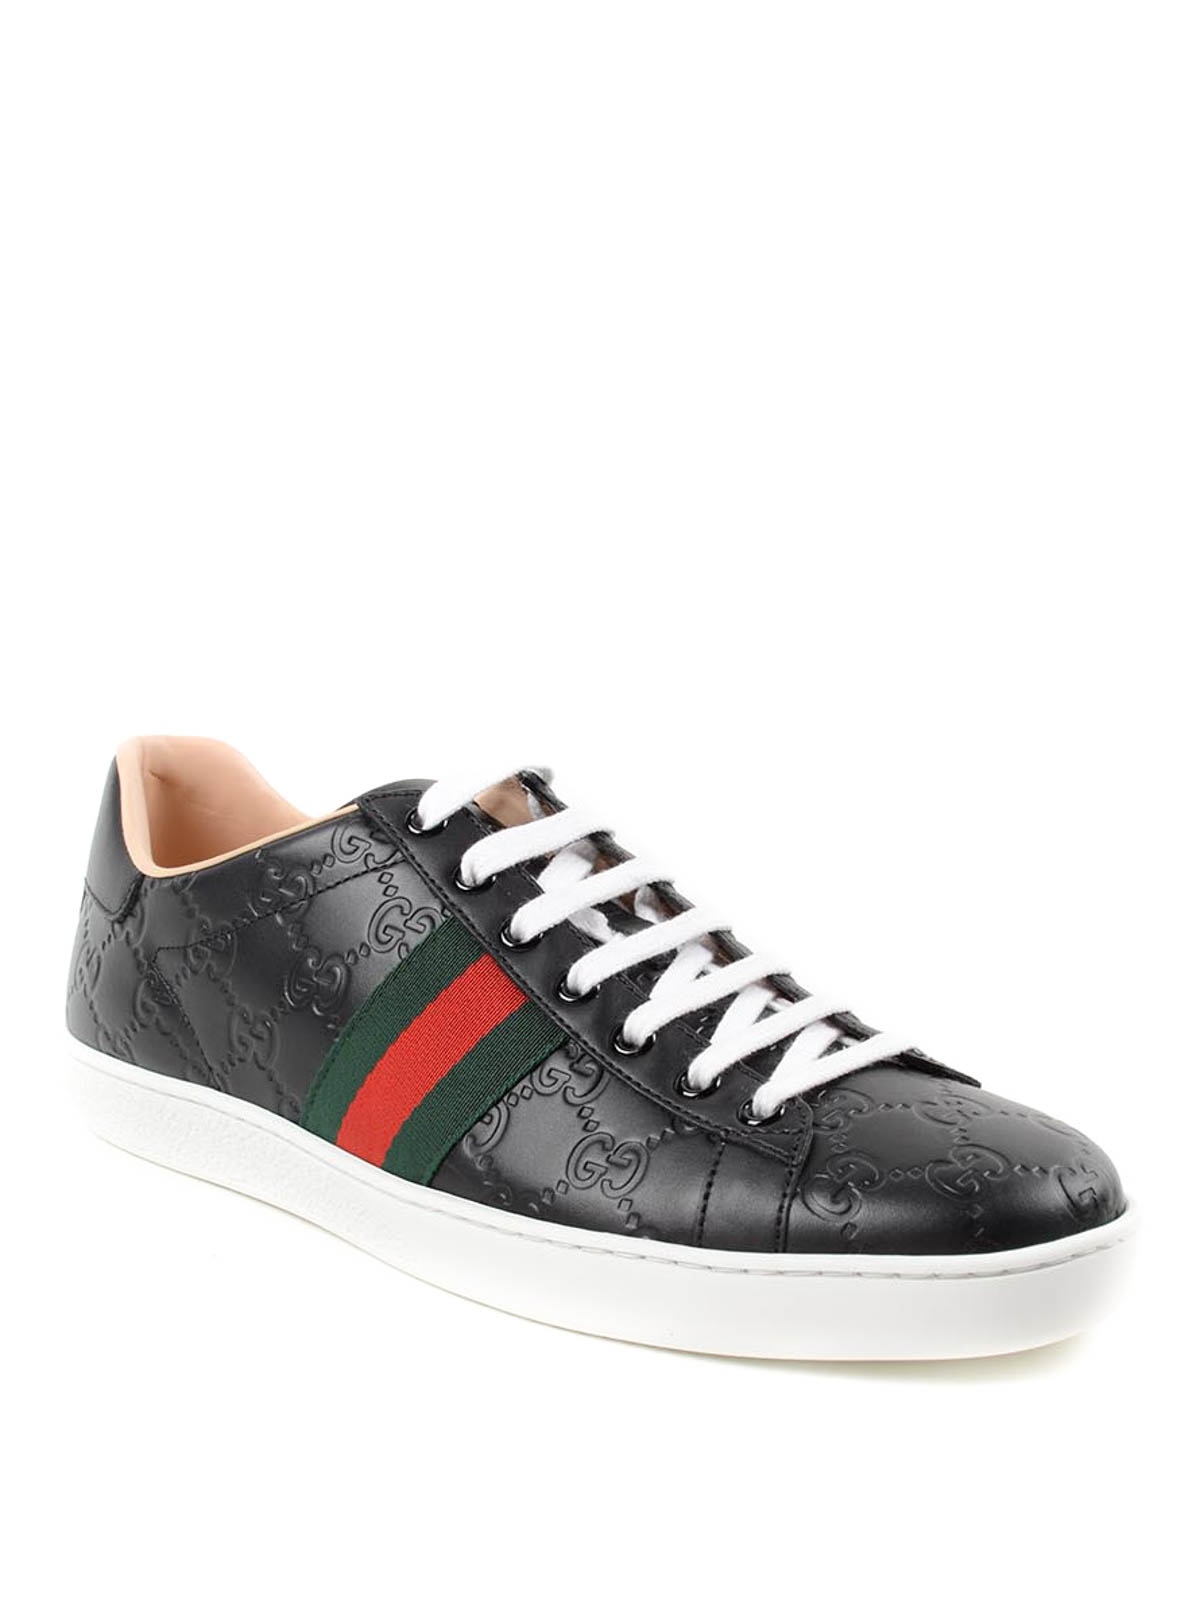 GG leather sneakers by Gucci - trainers | Shop online at www.waterandnature.org